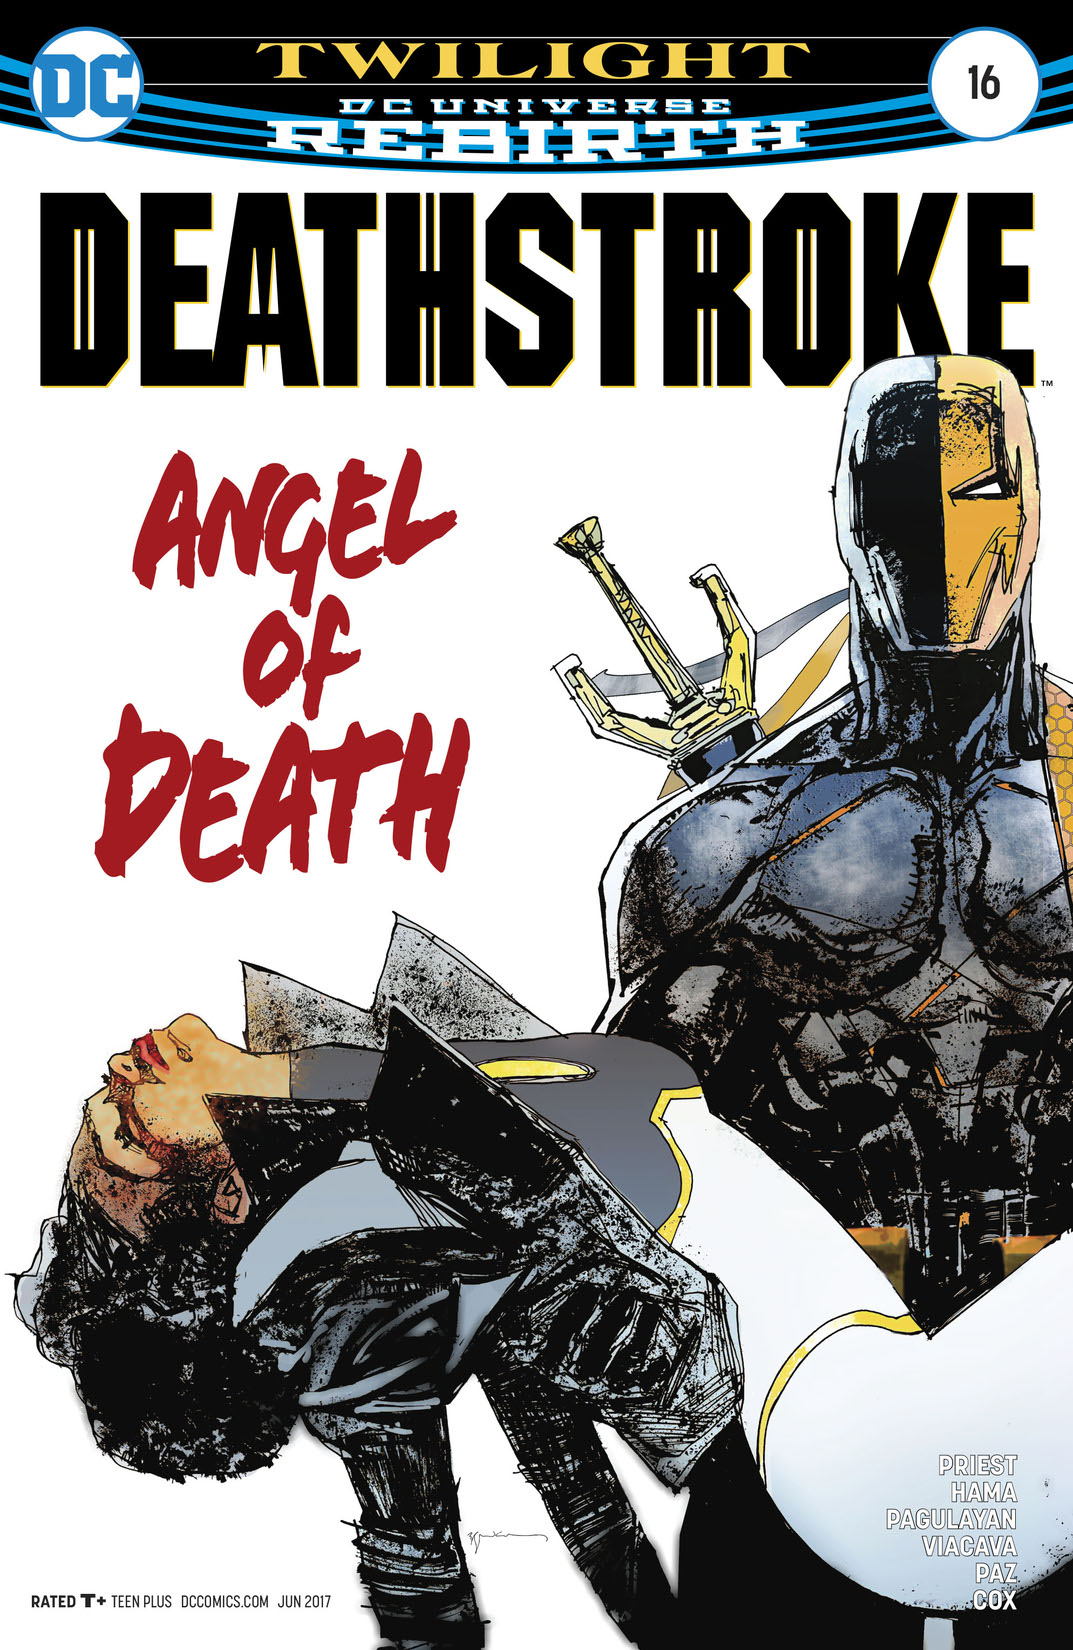 Deathstroke (2016-) #16 preview images